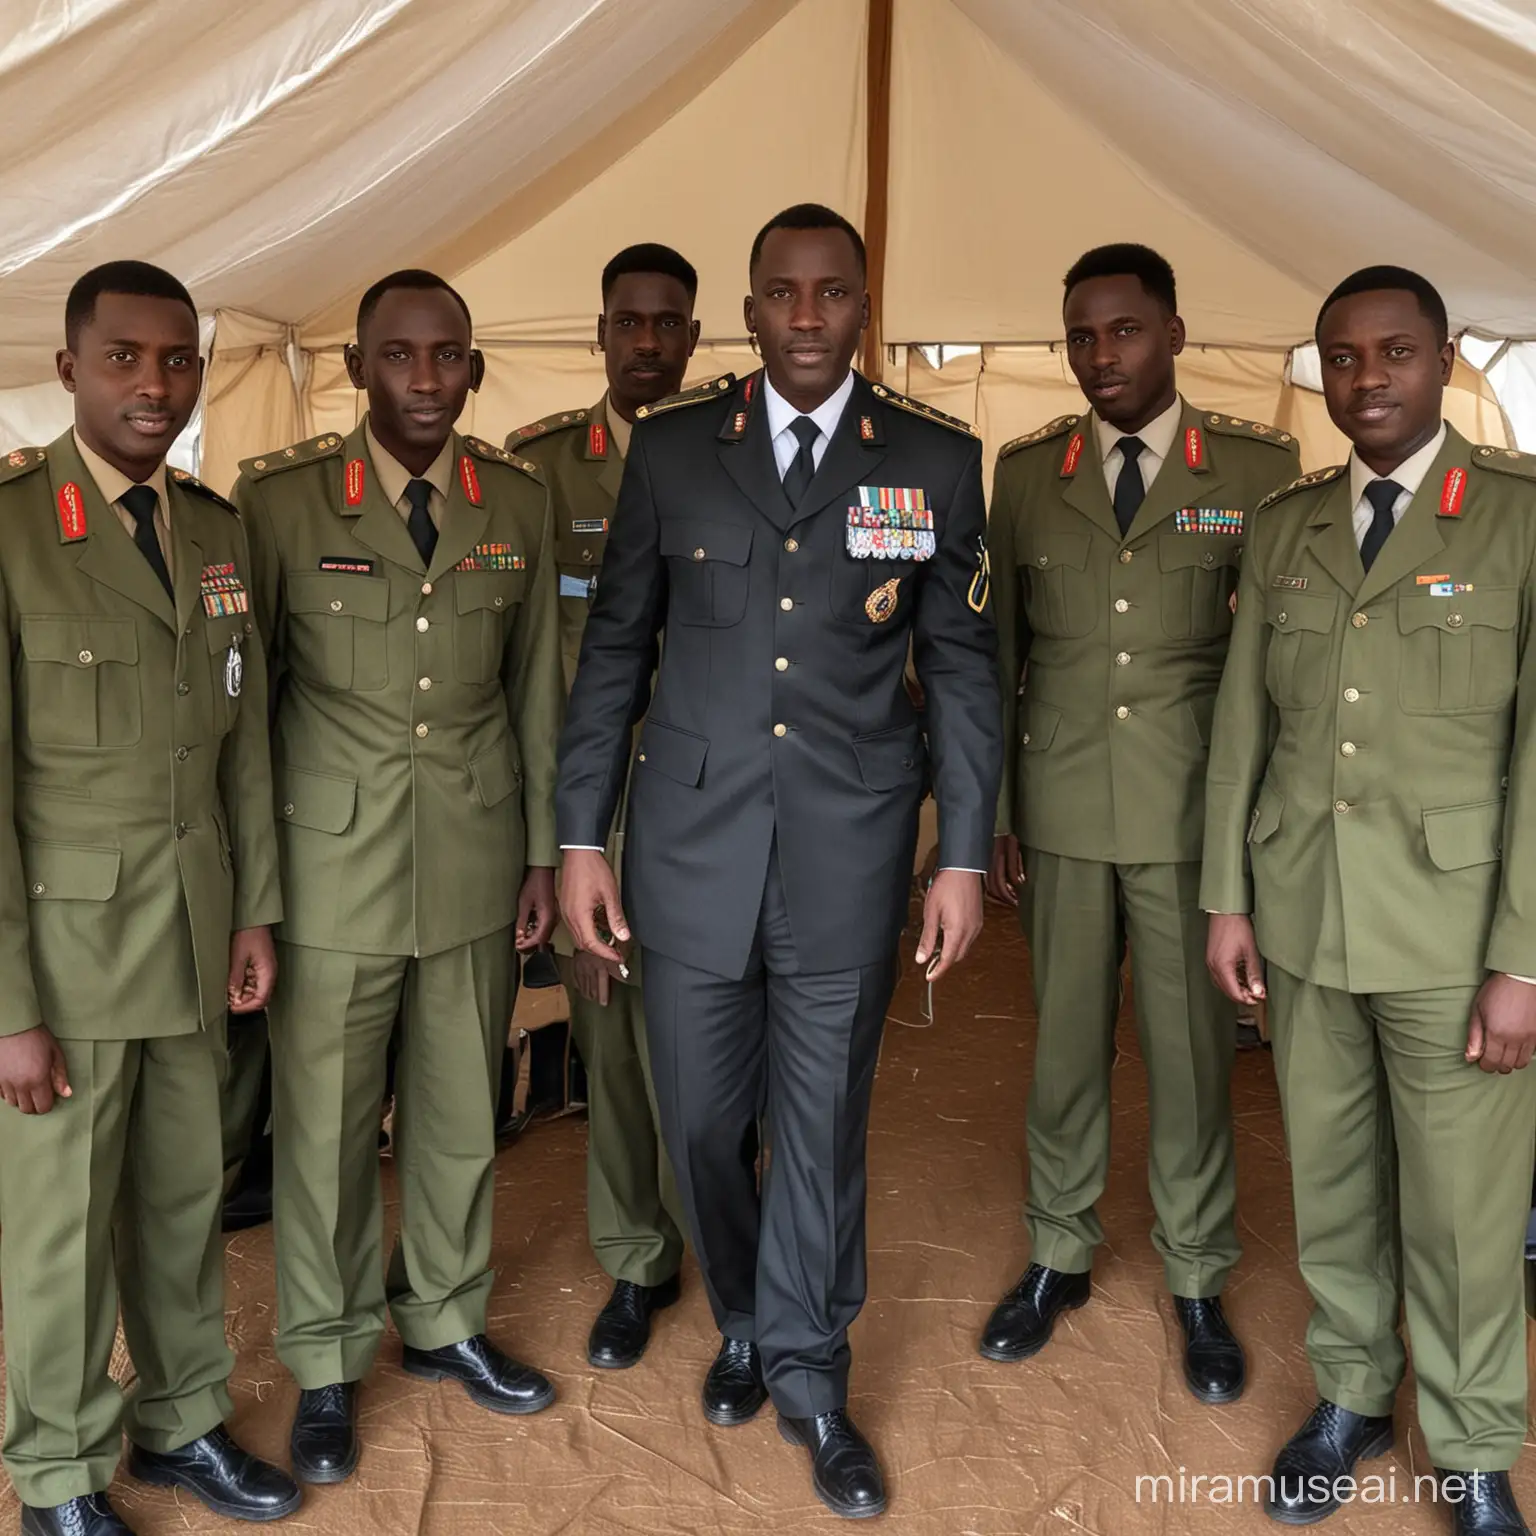 Kenyan Defense Forces Personnel in Uniform with Man in Suit